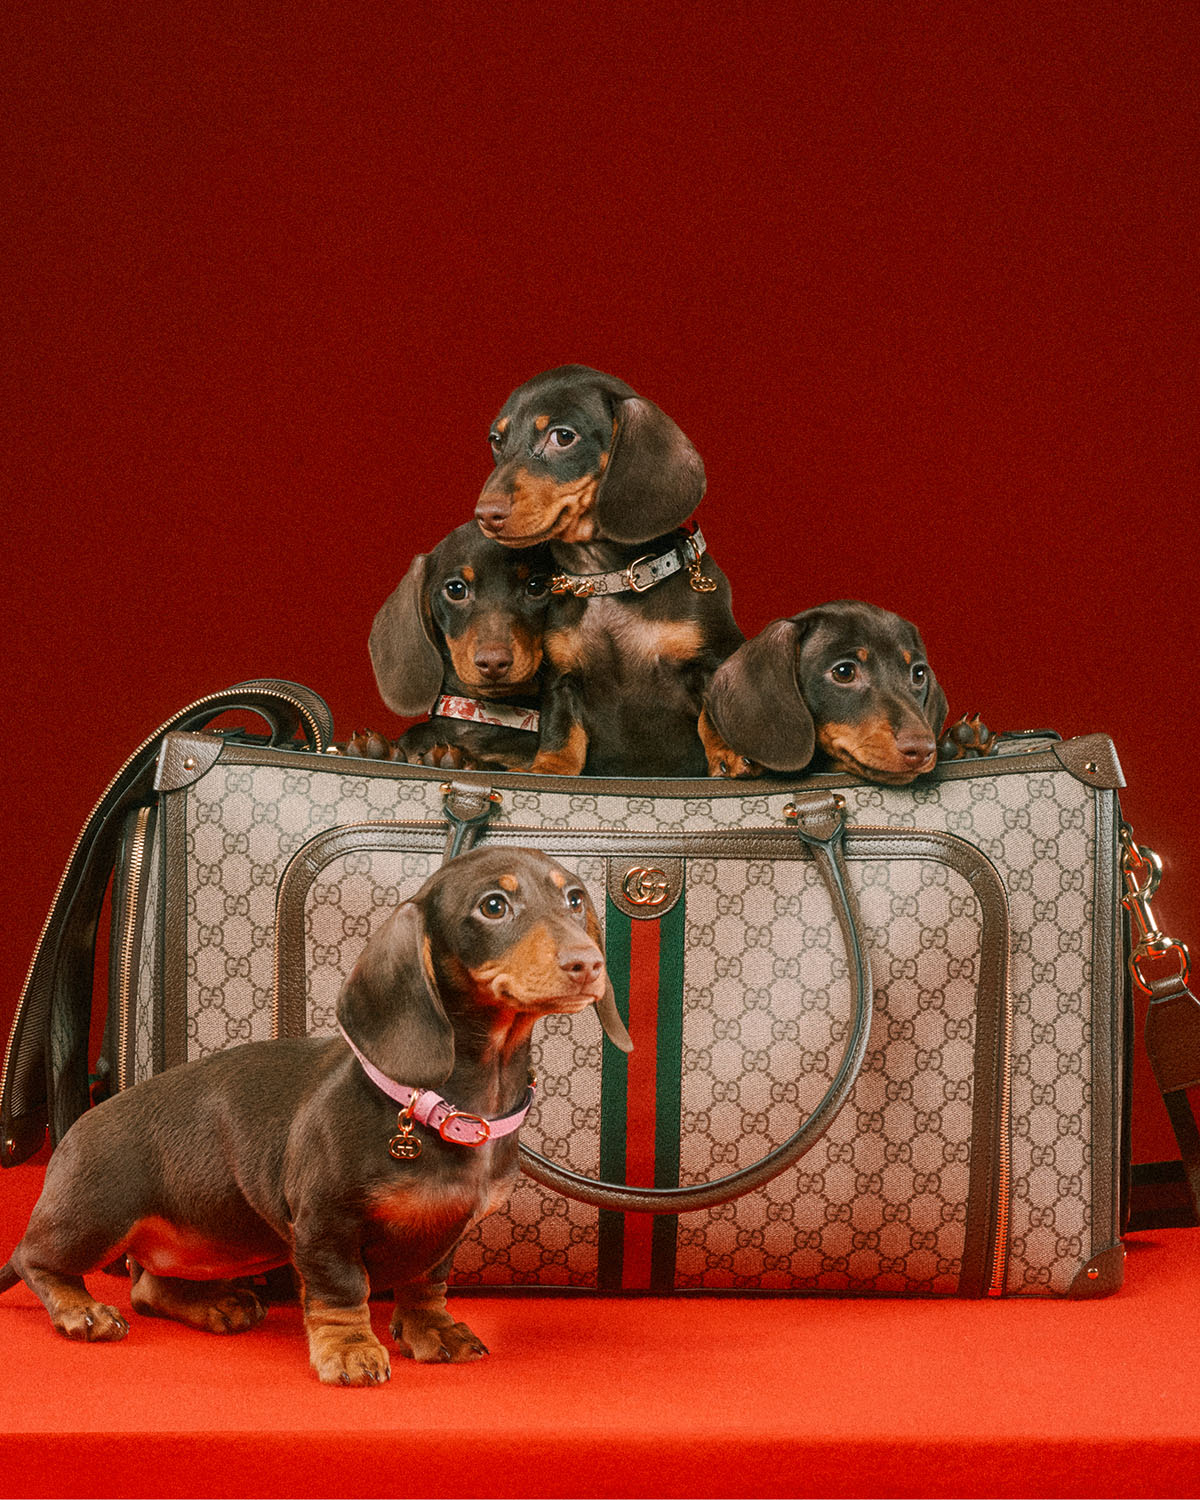 Gucci Launches First Pet Collection of Collars, Leashes, Beds and More –  The Hollywood Reporter